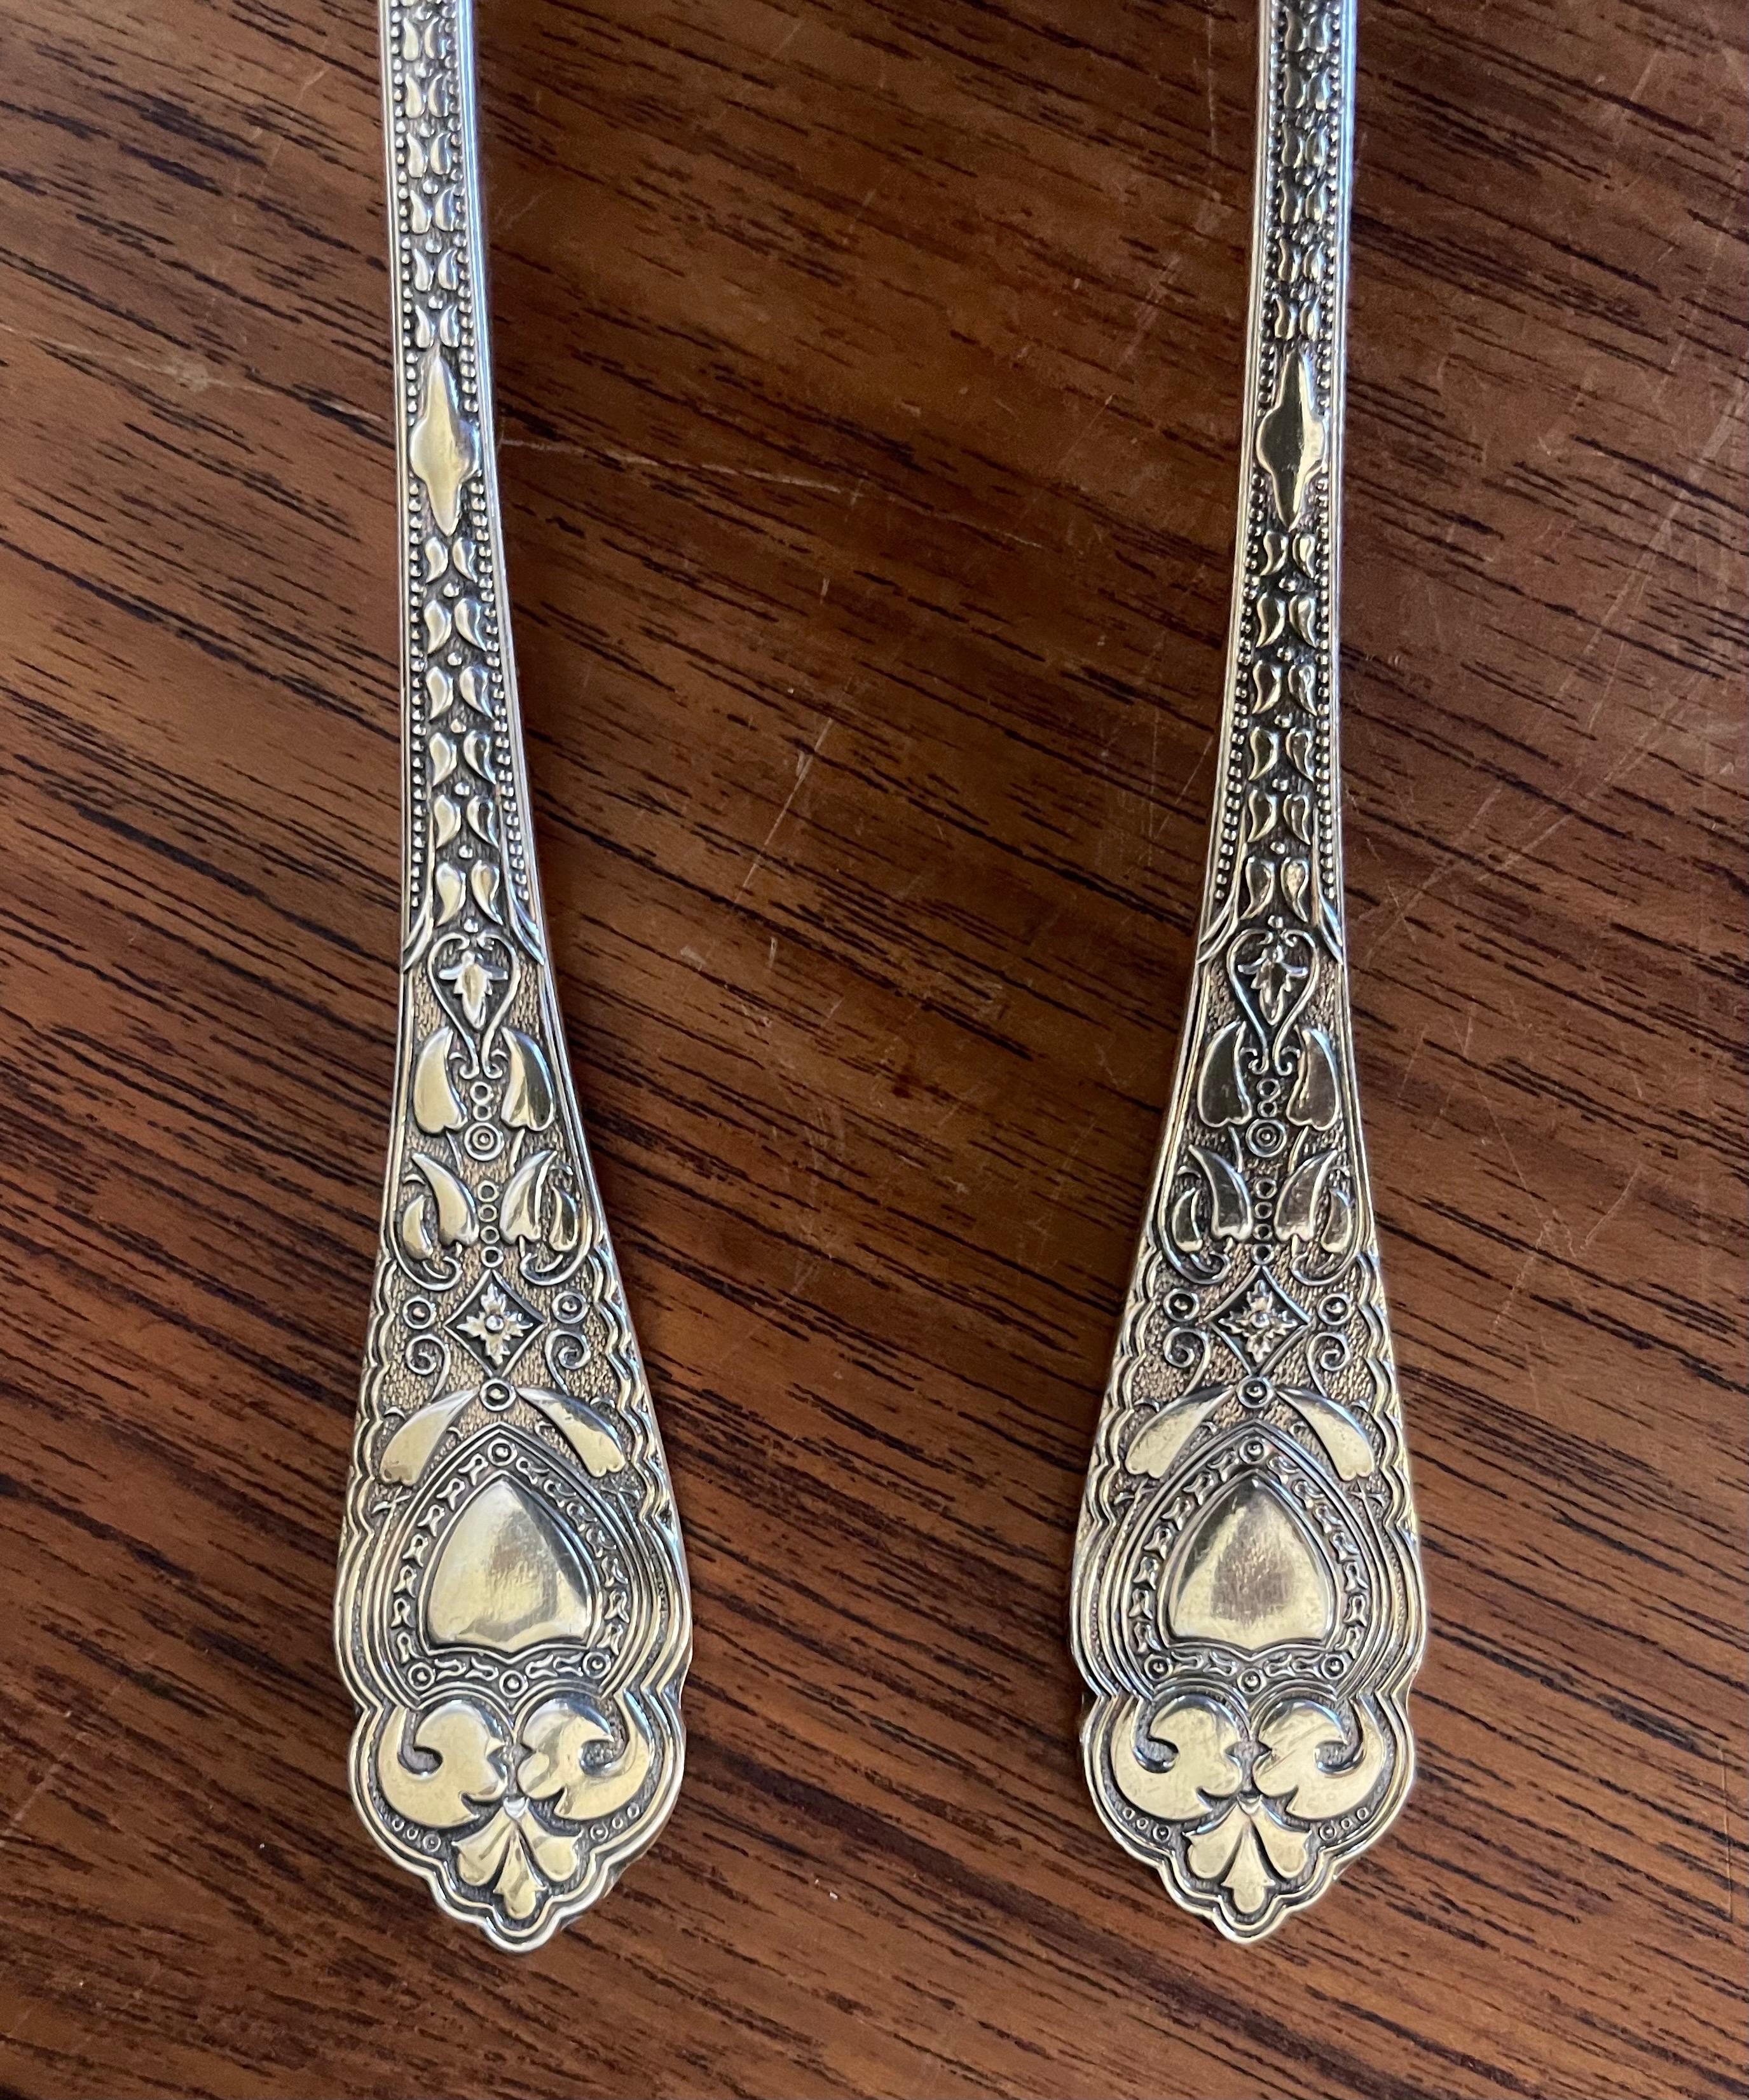 Pair of English Sheffield Silver Plated Serving Spoons in Box by I. Magnin For Sale 1